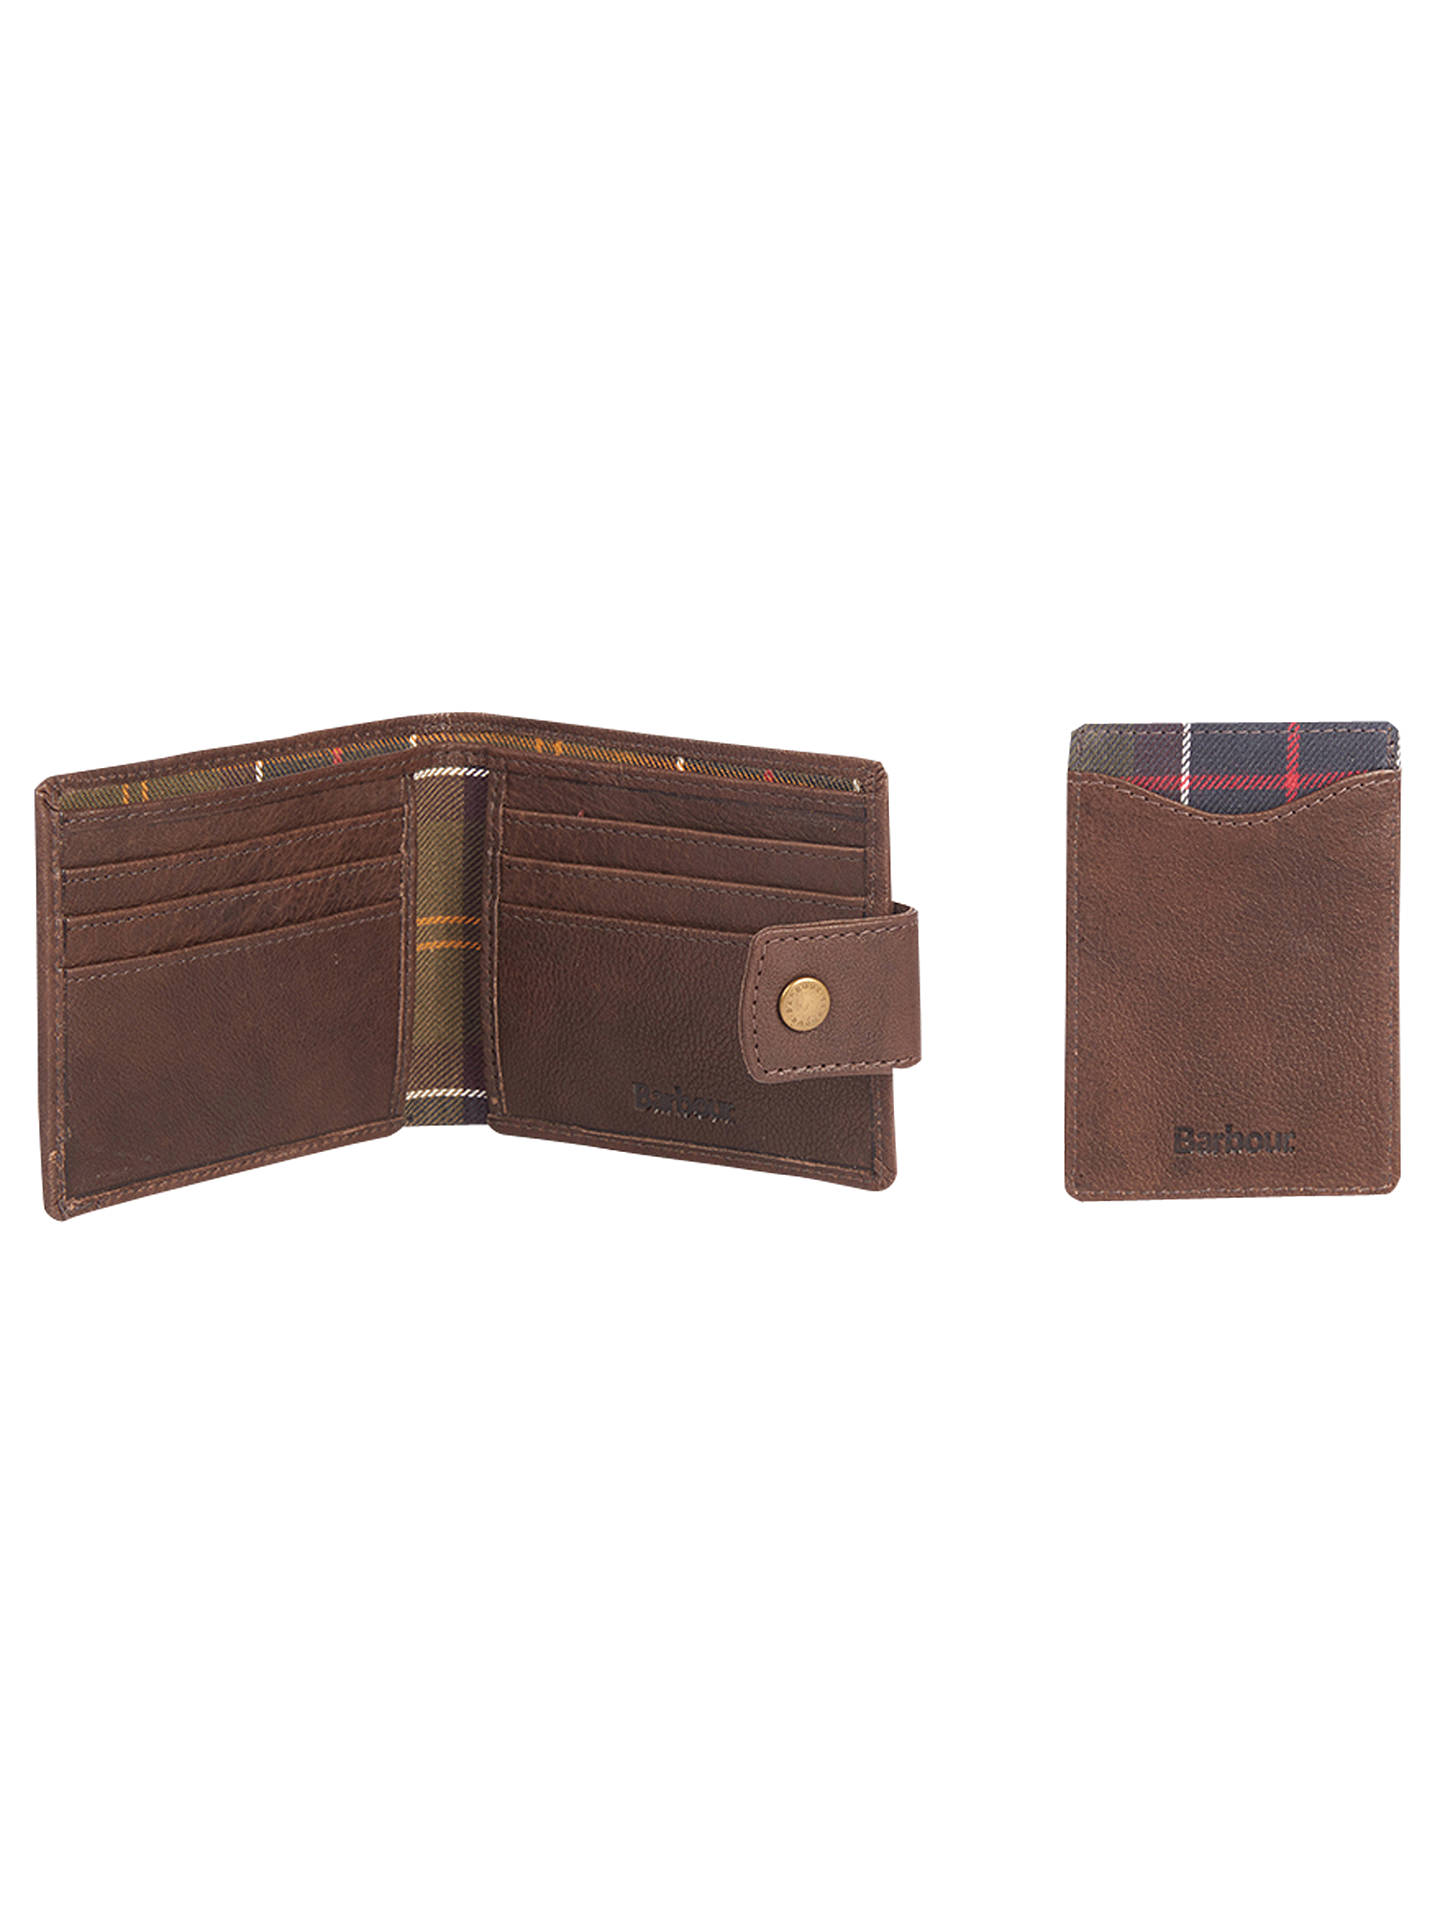 Barbour Leather Wallet and Card Holder Gift Set, Brown at John Lewis & Partners